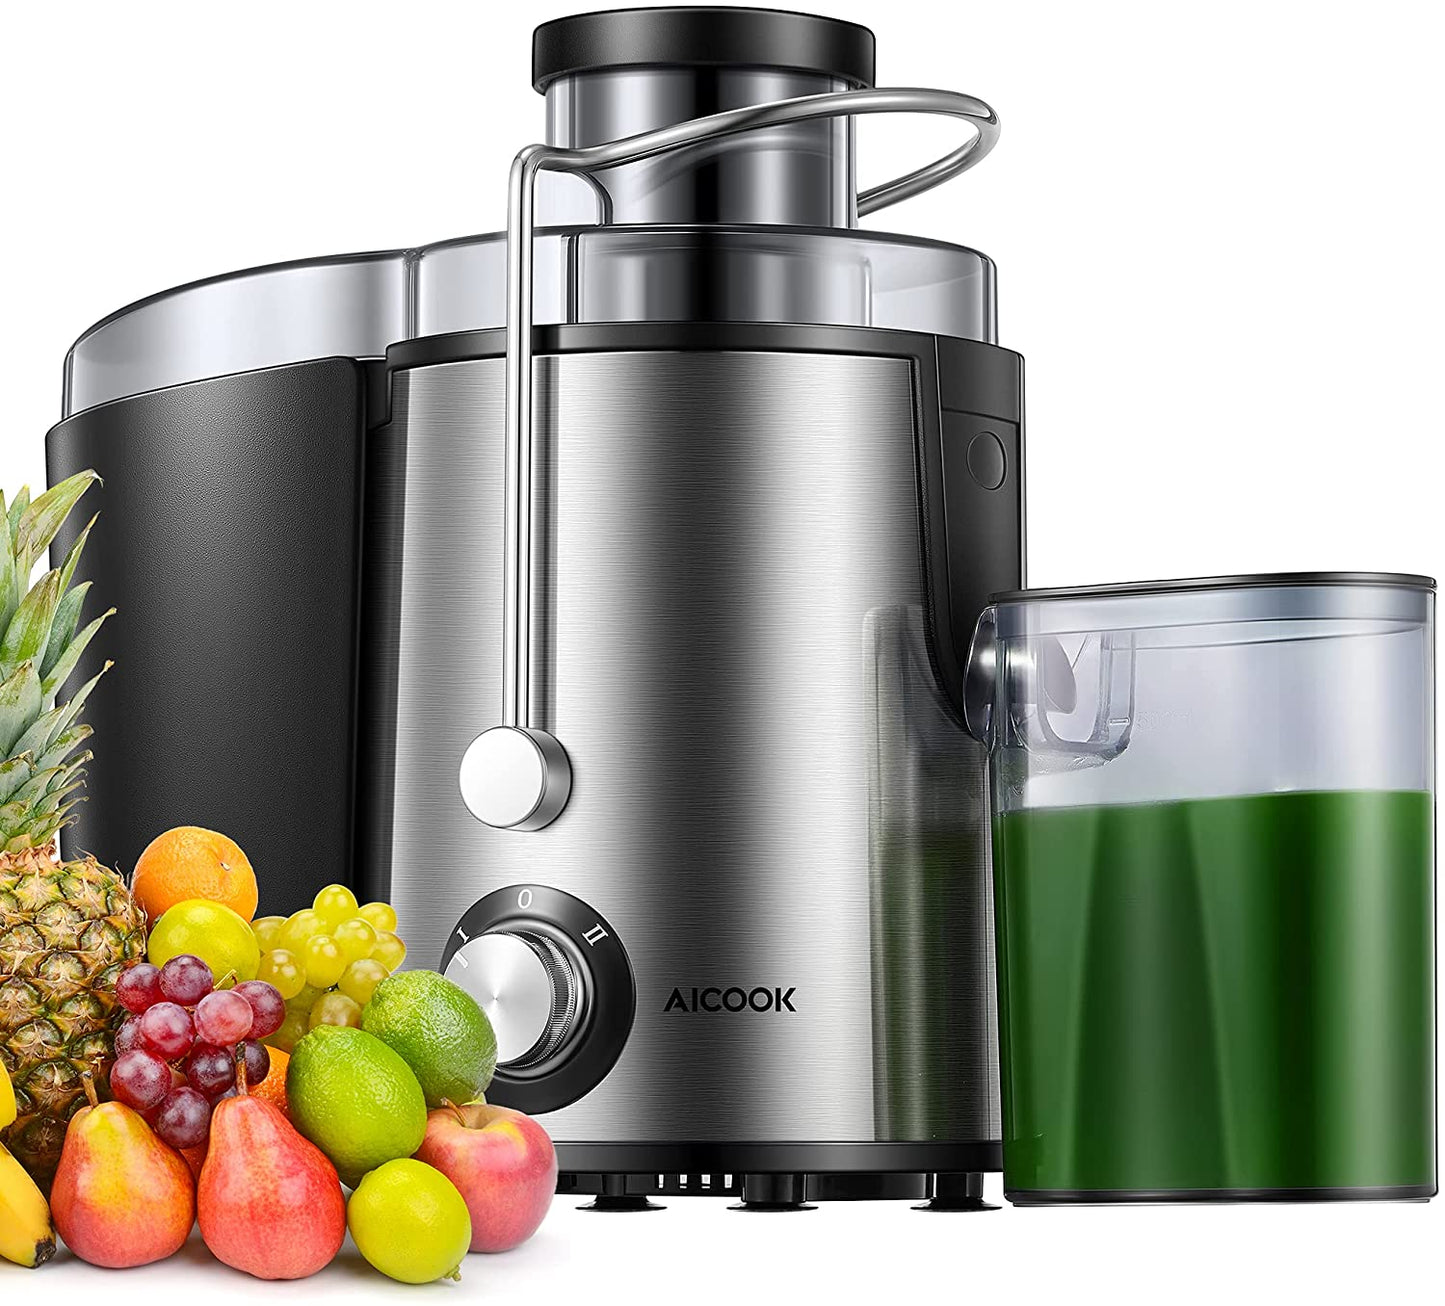 Aicook | Centrifugal Juicer Machine, Juice Extractor, 3''Wide Mouth Juicer with 2 Speeds for Fruits and Vegs, Anti-drip, Stainless Steel & BPA Free